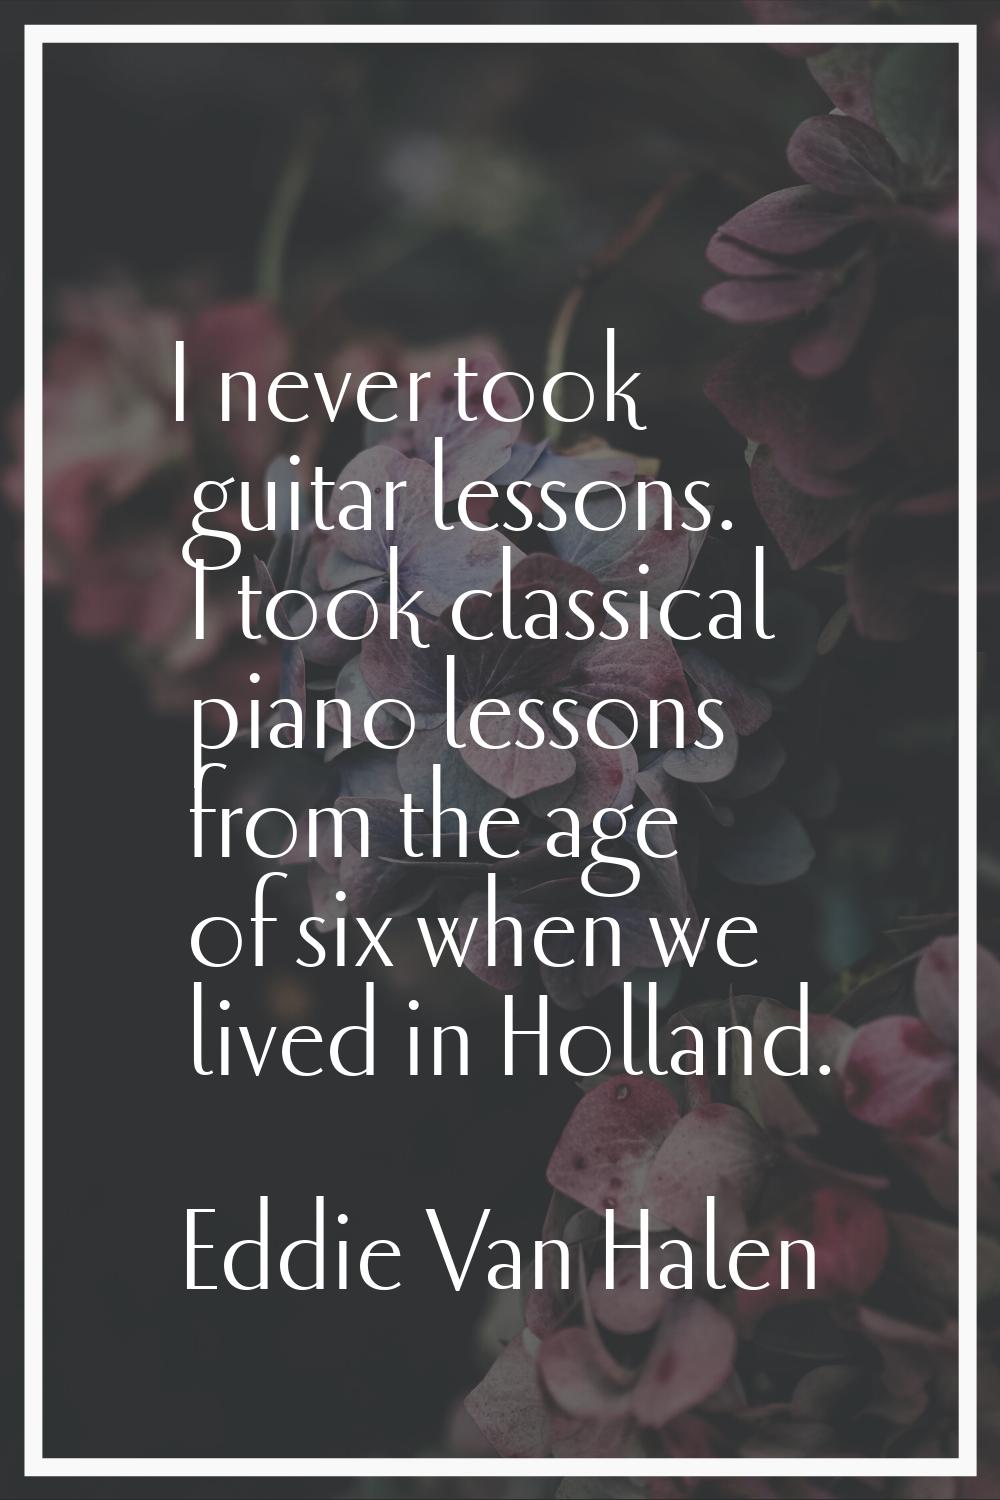 I never took guitar lessons. I took classical piano lessons from the age of six when we lived in Ho